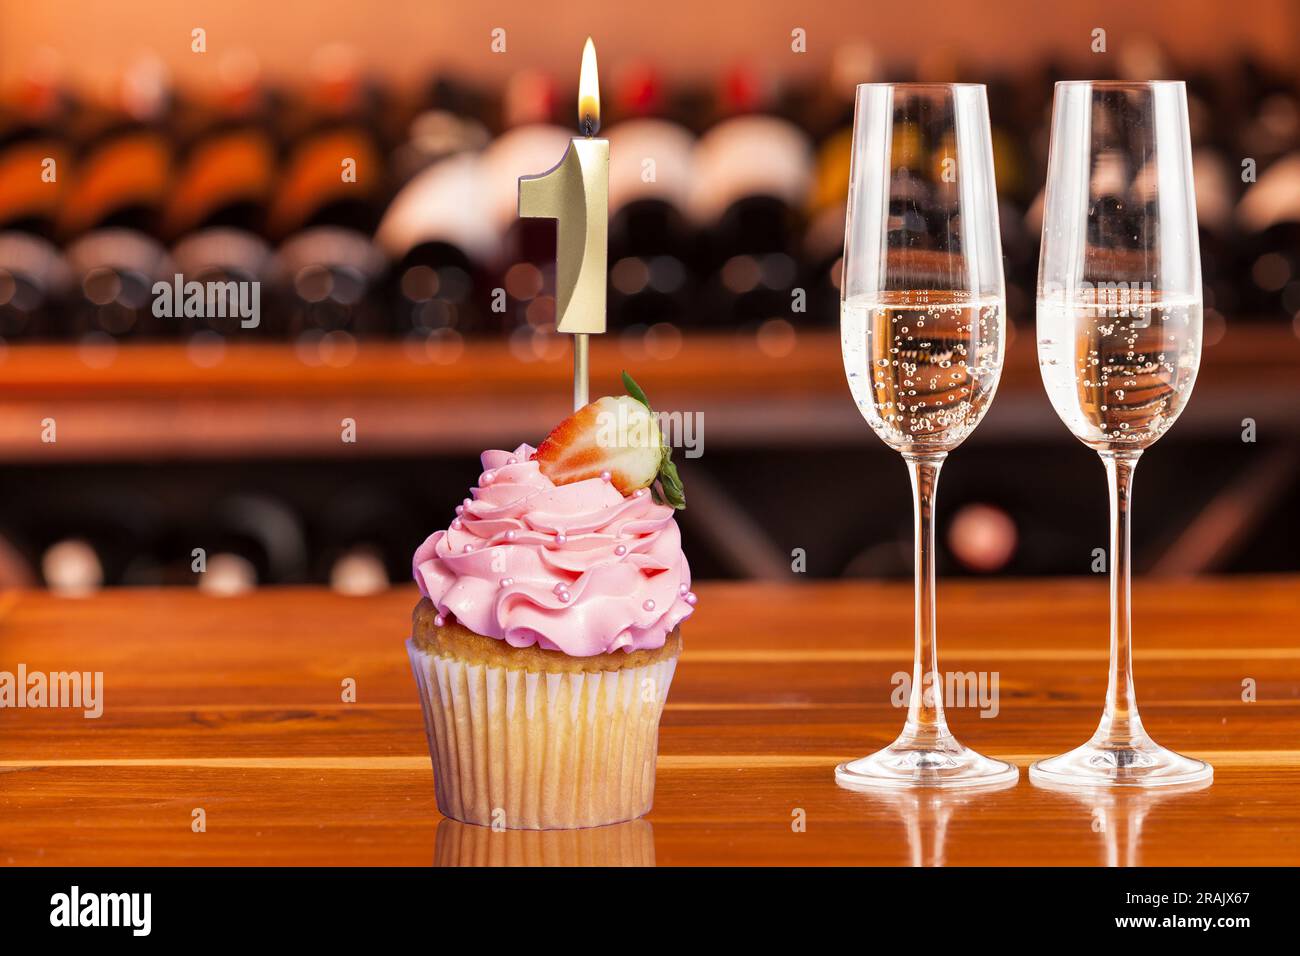 Cupcake With Number For Celebration Of Birthday Or Anniversary; Number 1. Stock Photo